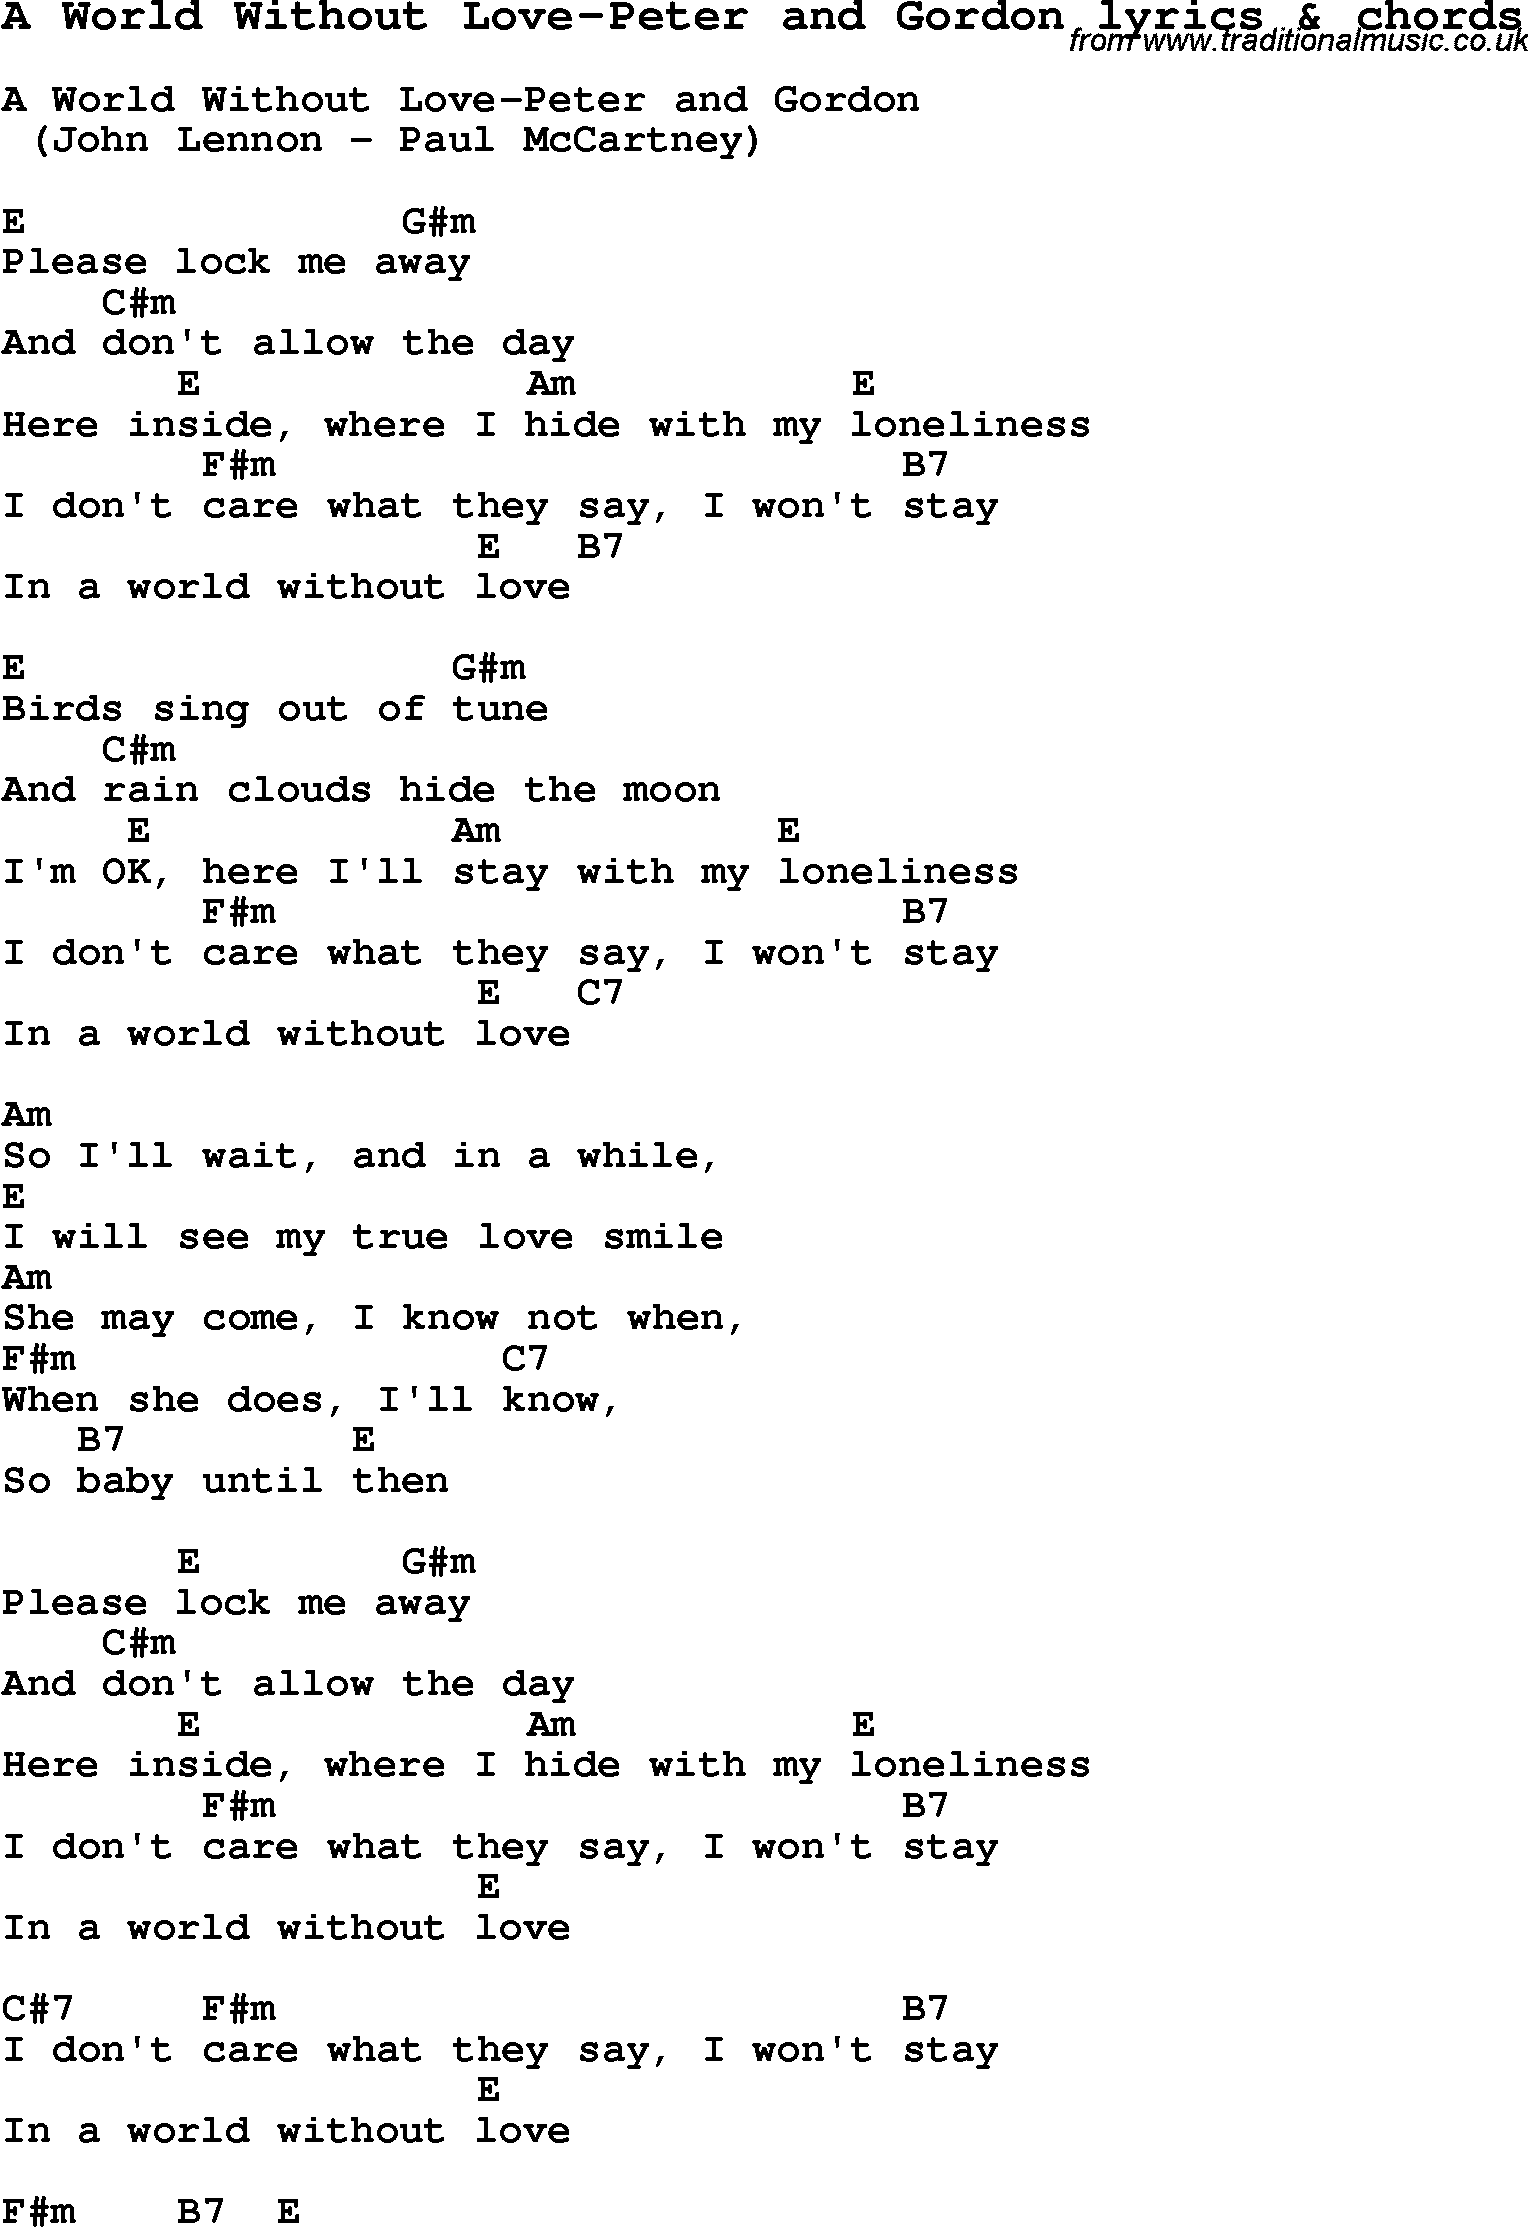 Love Song Lyrics for: A World Without Love-Peter and Gordon with chords for Ukulele, Guitar Banjo etc.